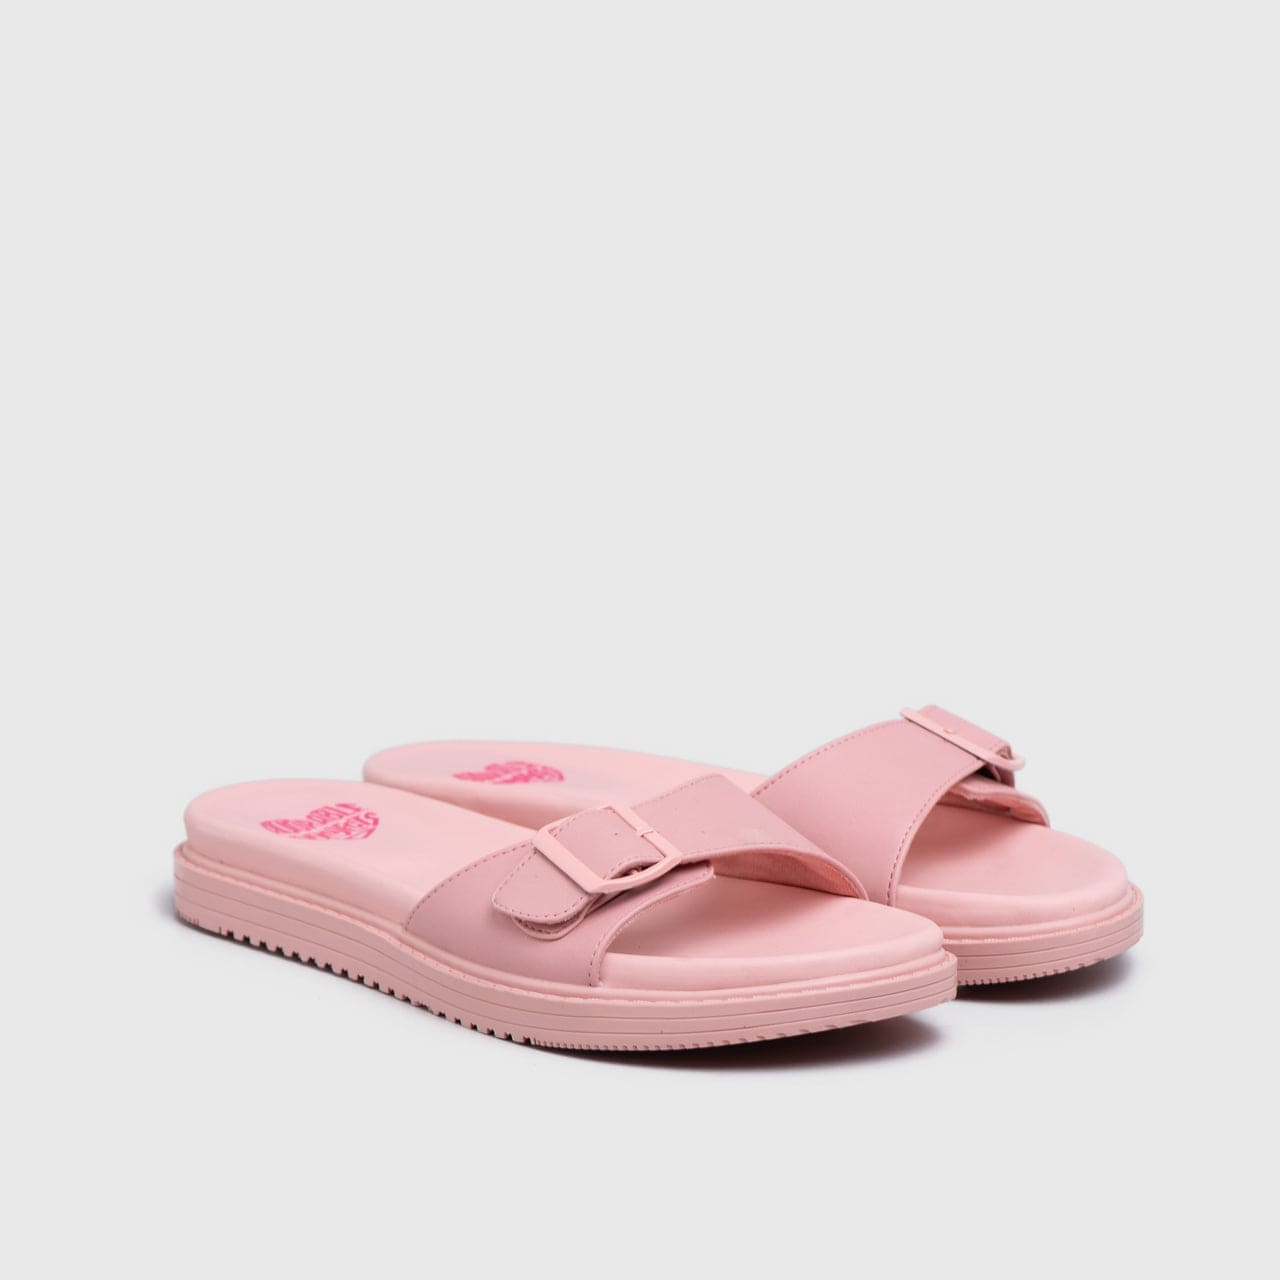 Adorable Projects Official Adorableprojects - Yurinta Sandals Pink - Sendal Wanita